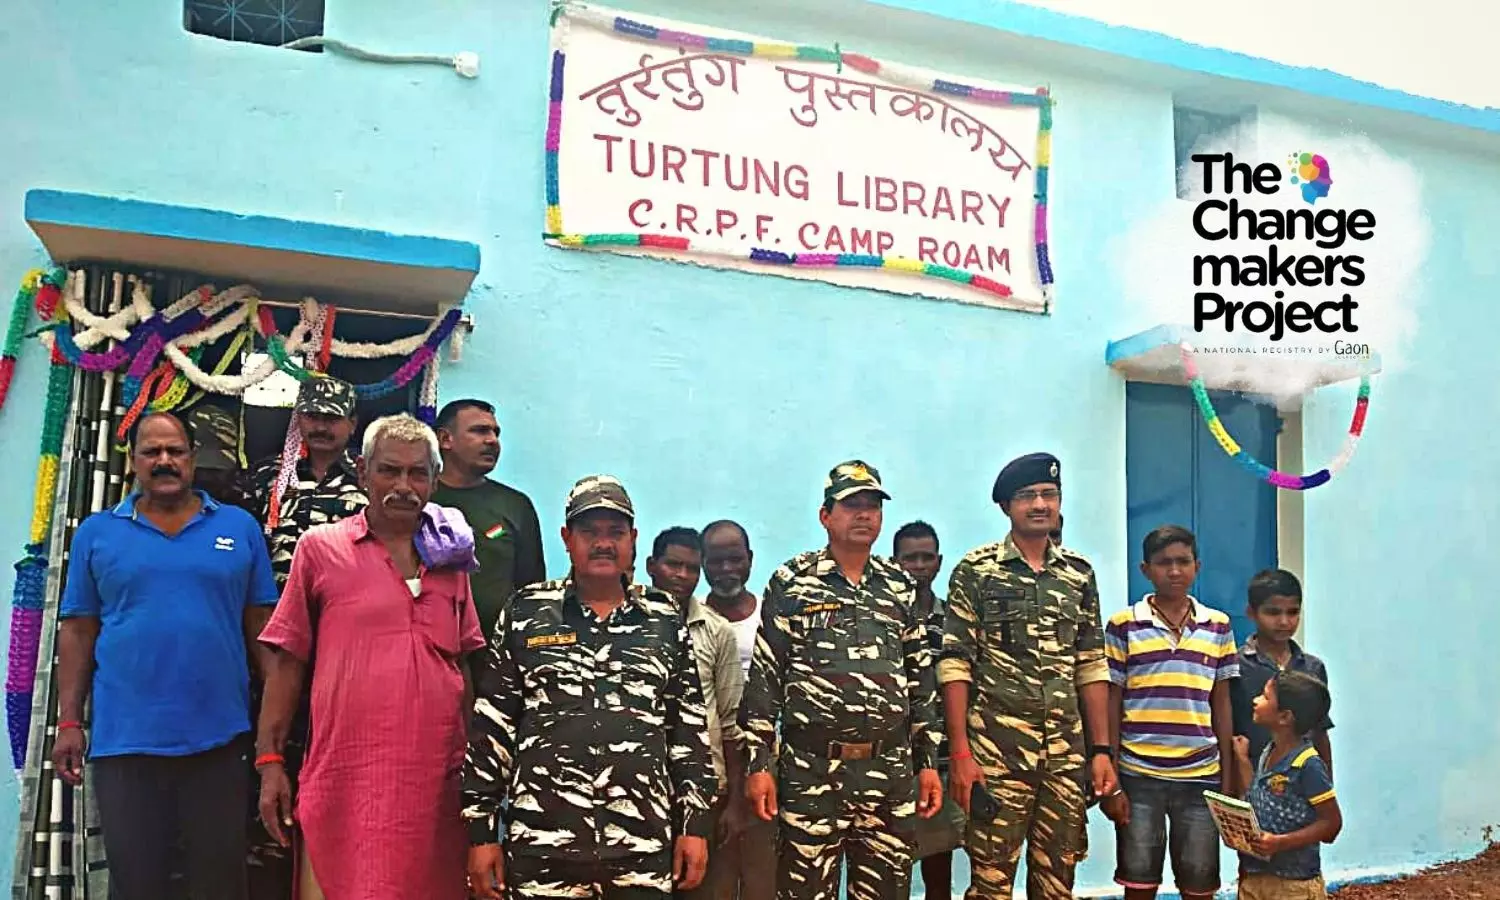 A CRPF officer sets up libraries in remote villages